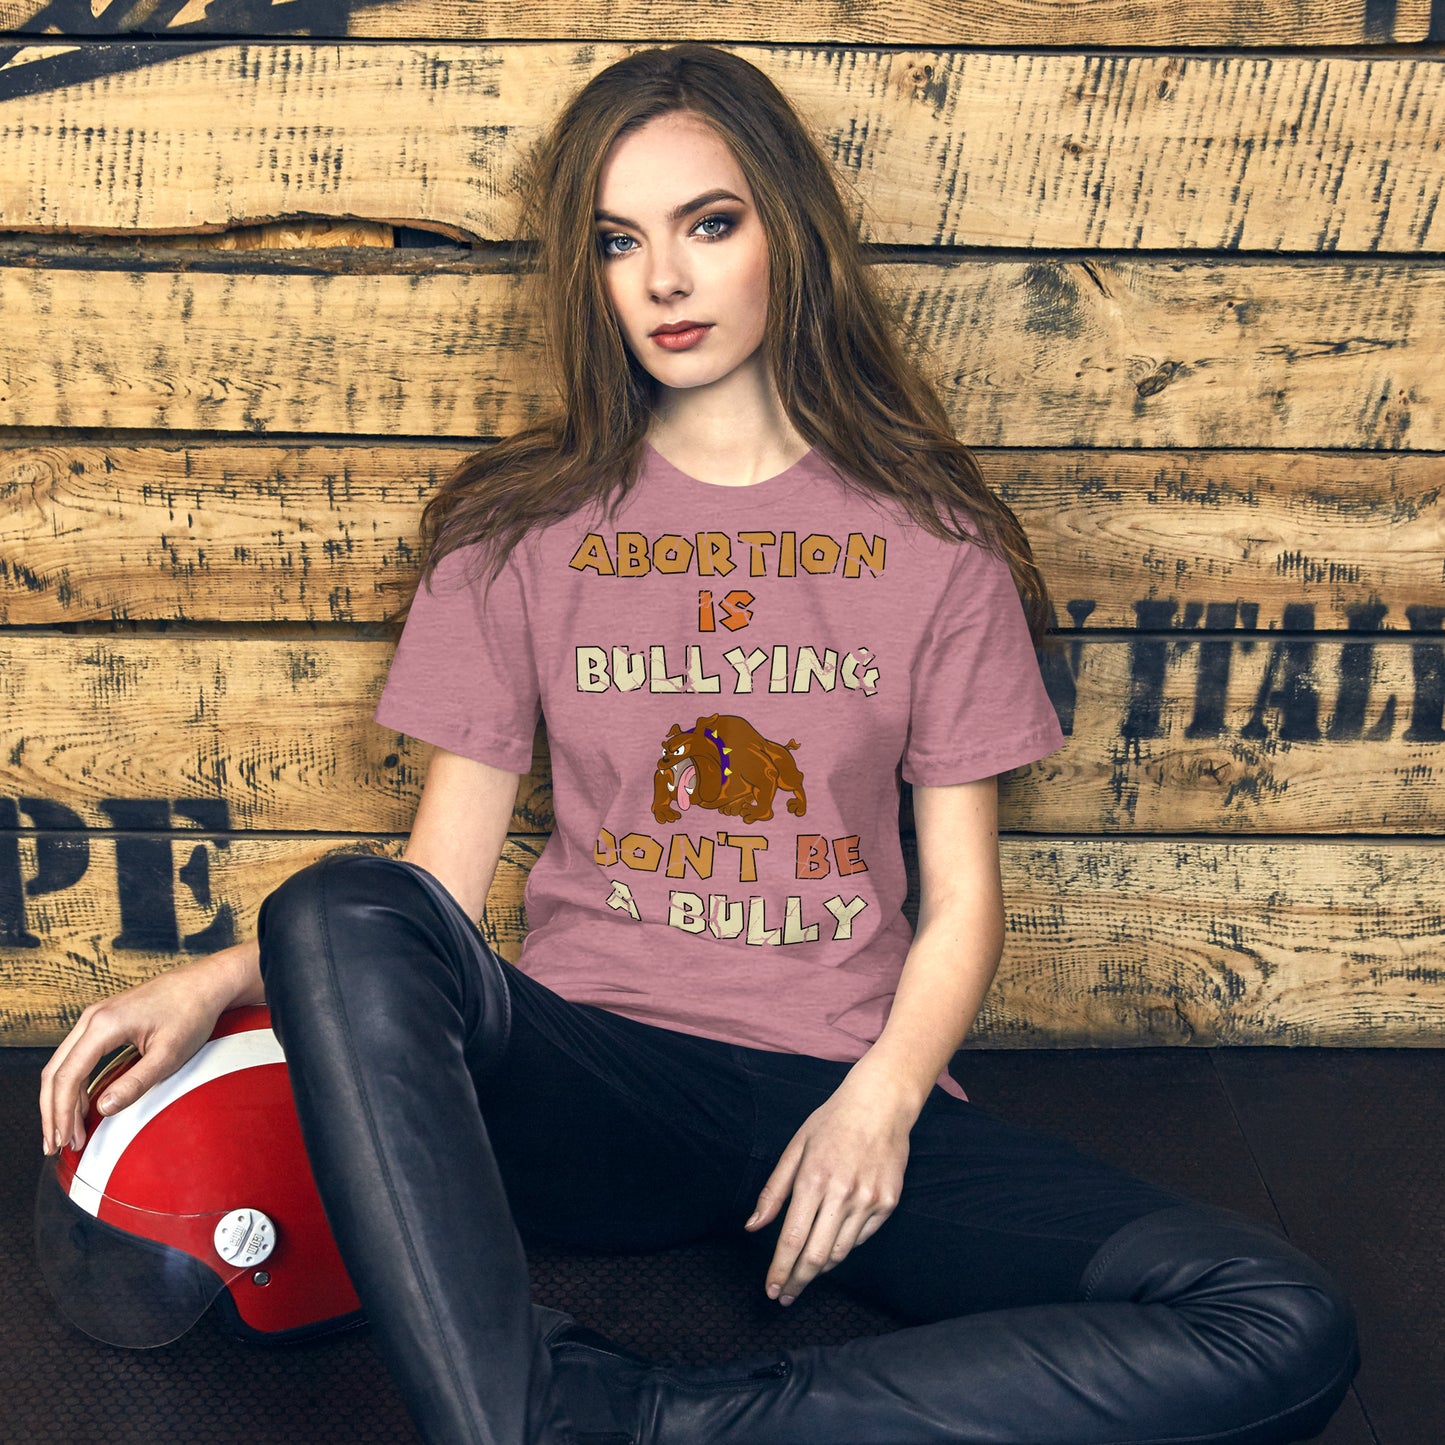 A001 T-shirt - Bella + Canvas 3001 Unisex T-shirt Featuring Bulldog Graphic with text “Abortion is Bullying. Don’t be a Bully.”